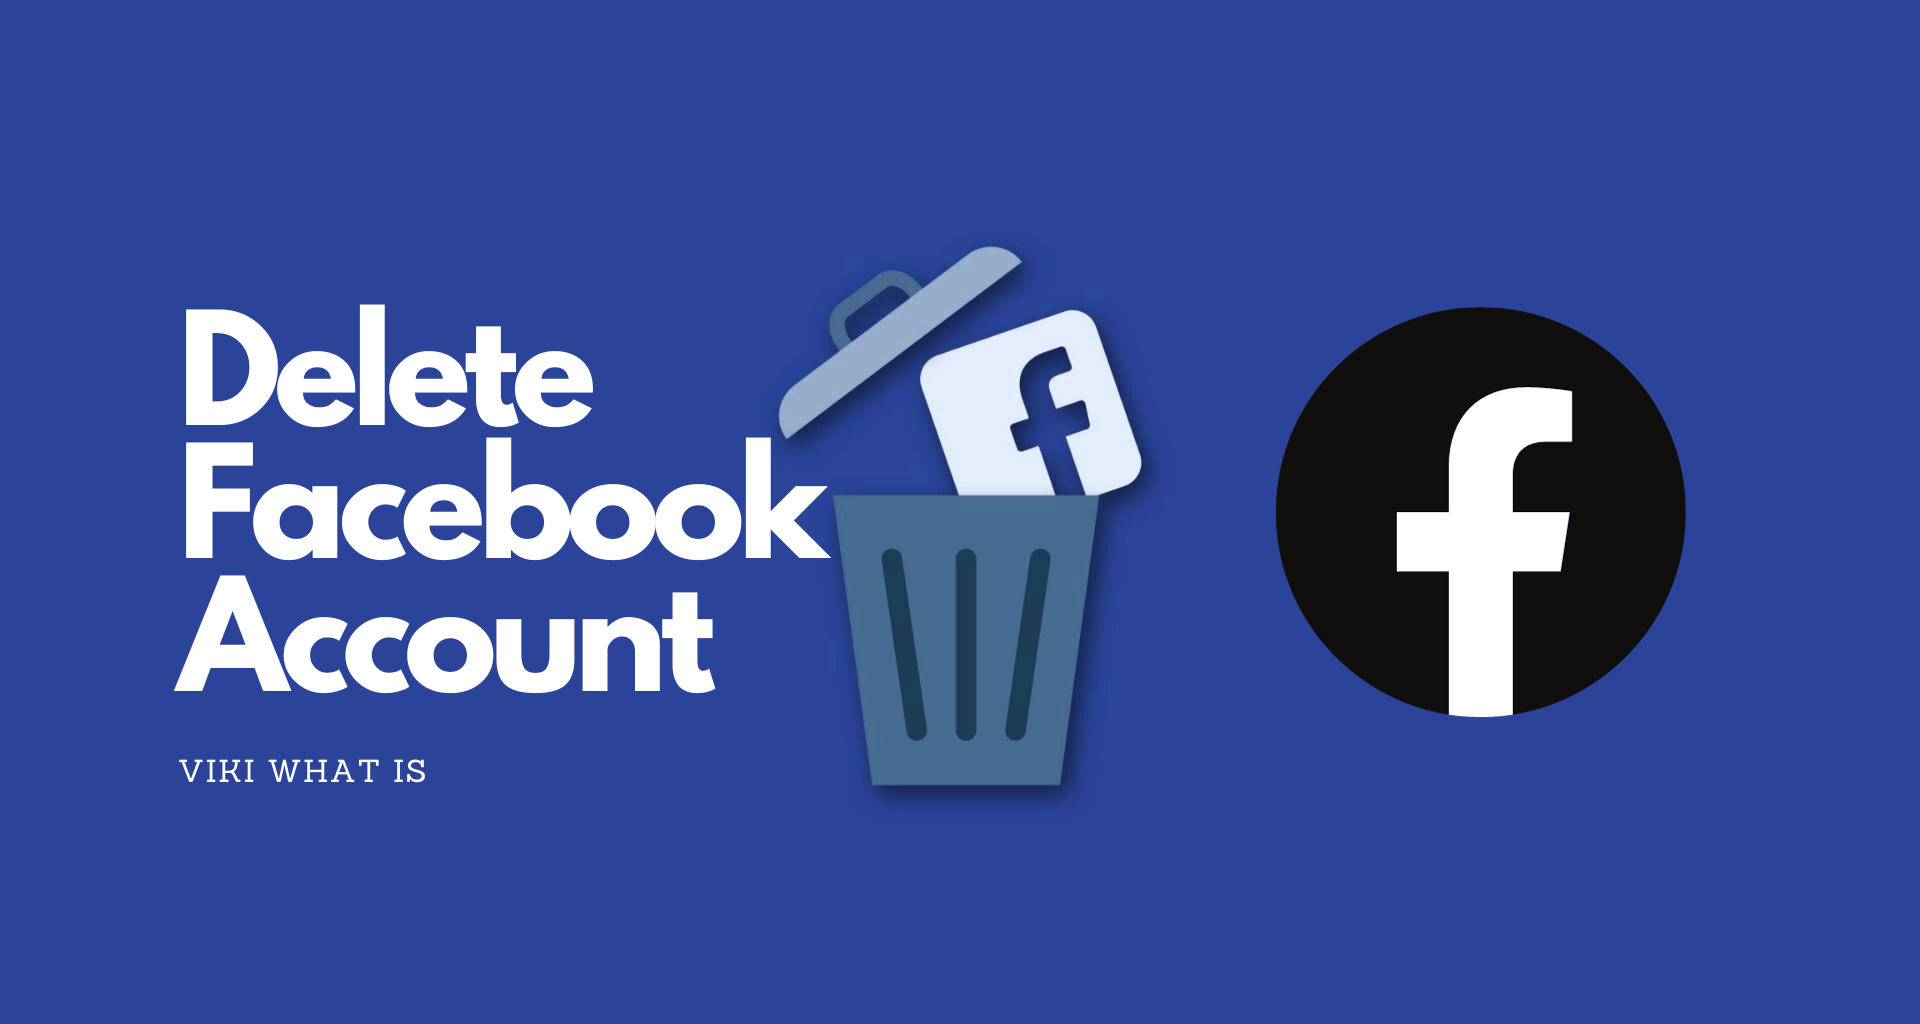 How to Delete Facebook Account on Phone